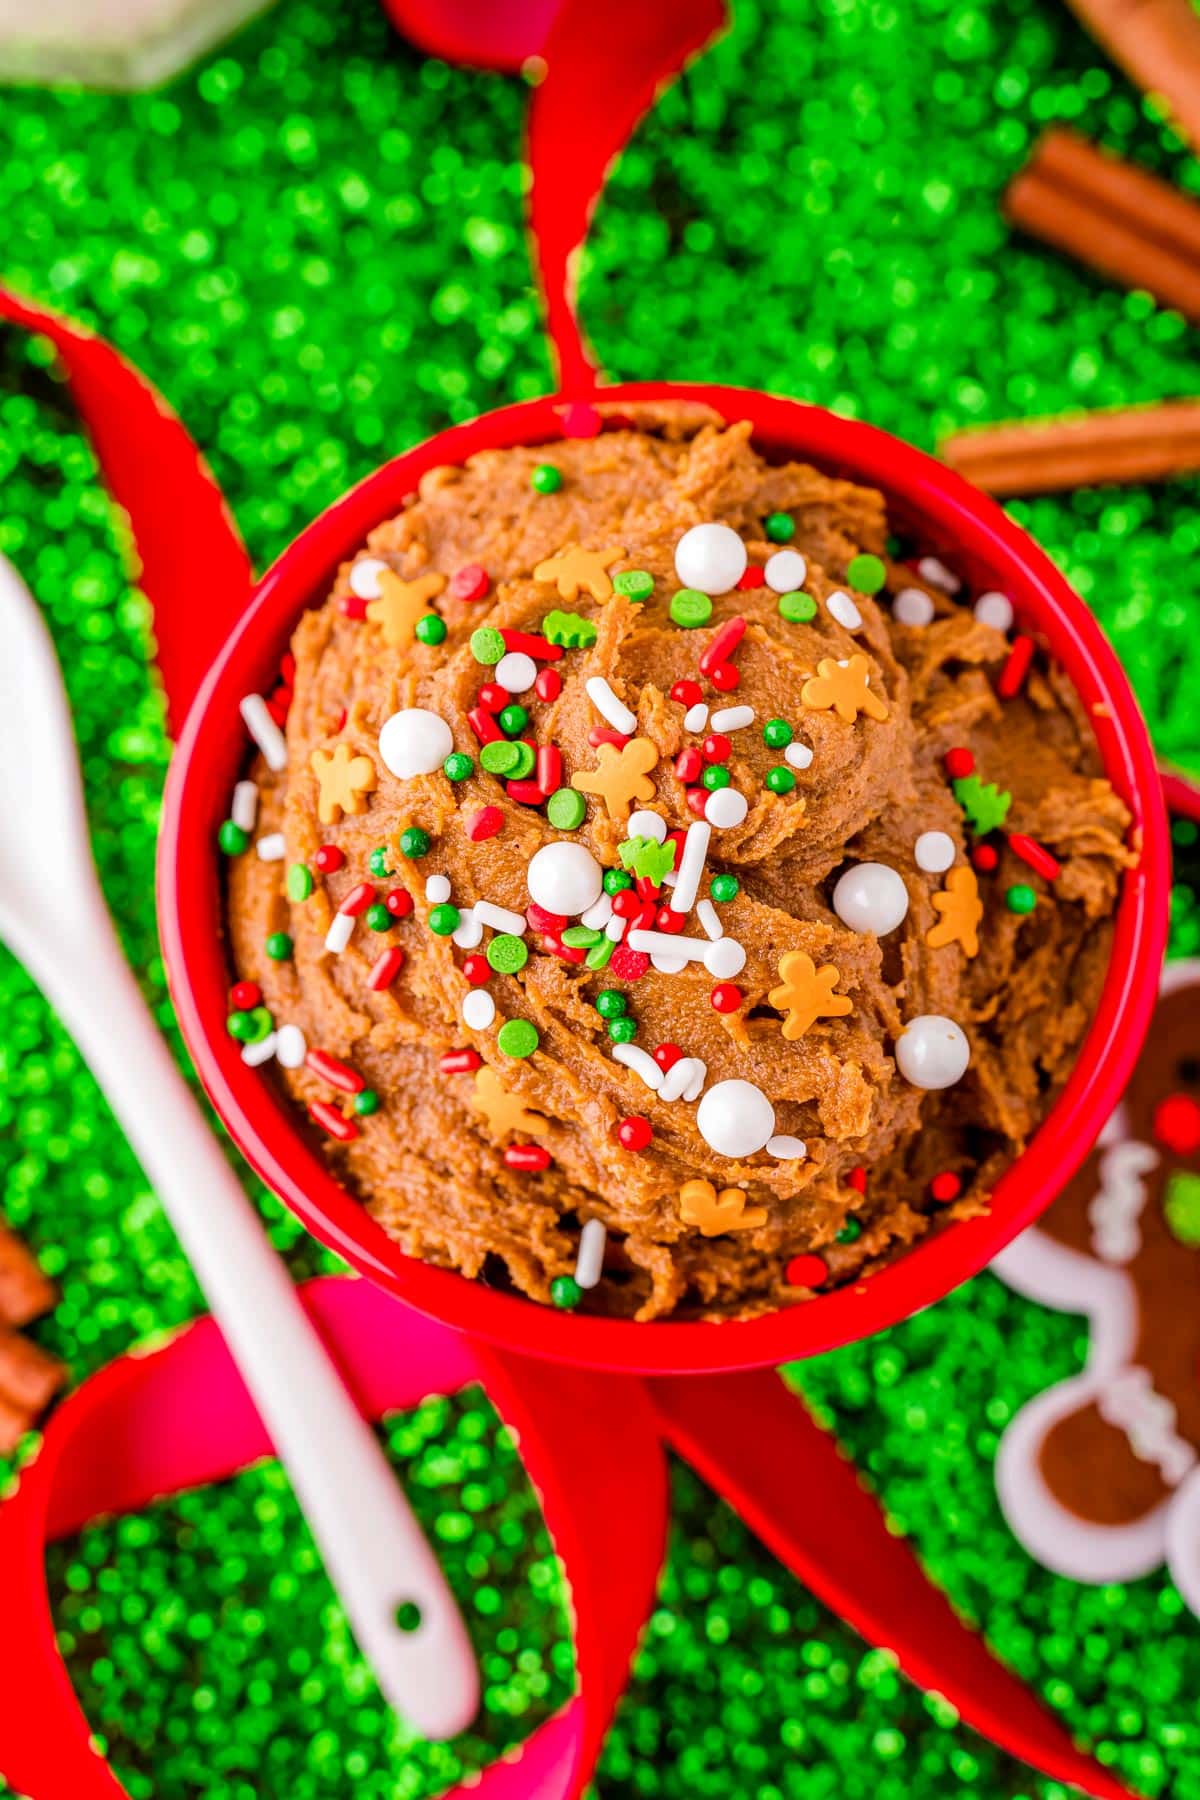 An overhead picture of the finished Edible Gingerbread Cookie Dough in a red serving bowl.